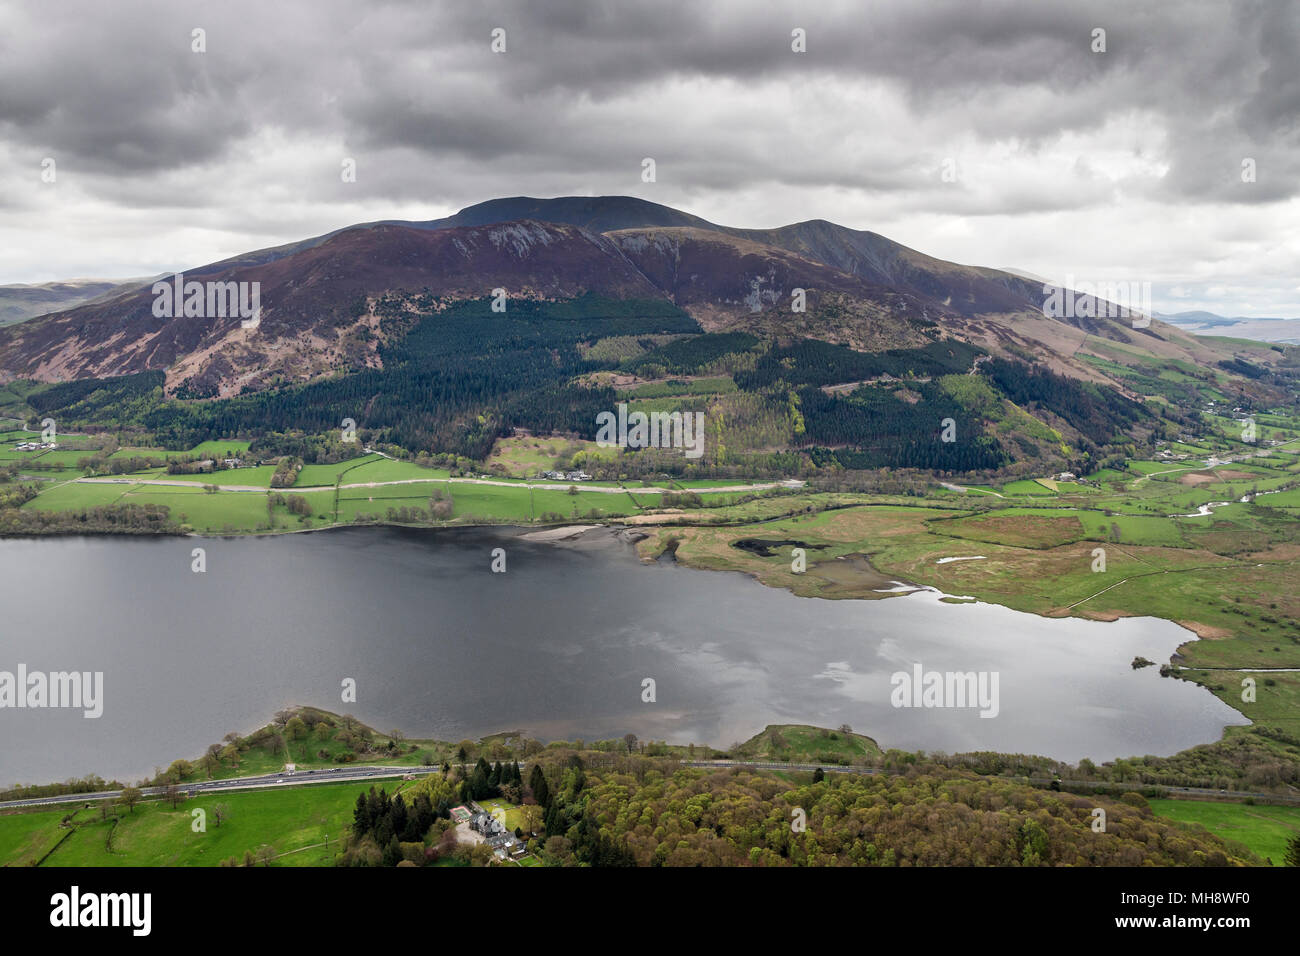 The View Over Bassenthwaite Lake Towards Skiddaw from the Mountain of Barf, Lake District, Cumbria, UK Stock Photo